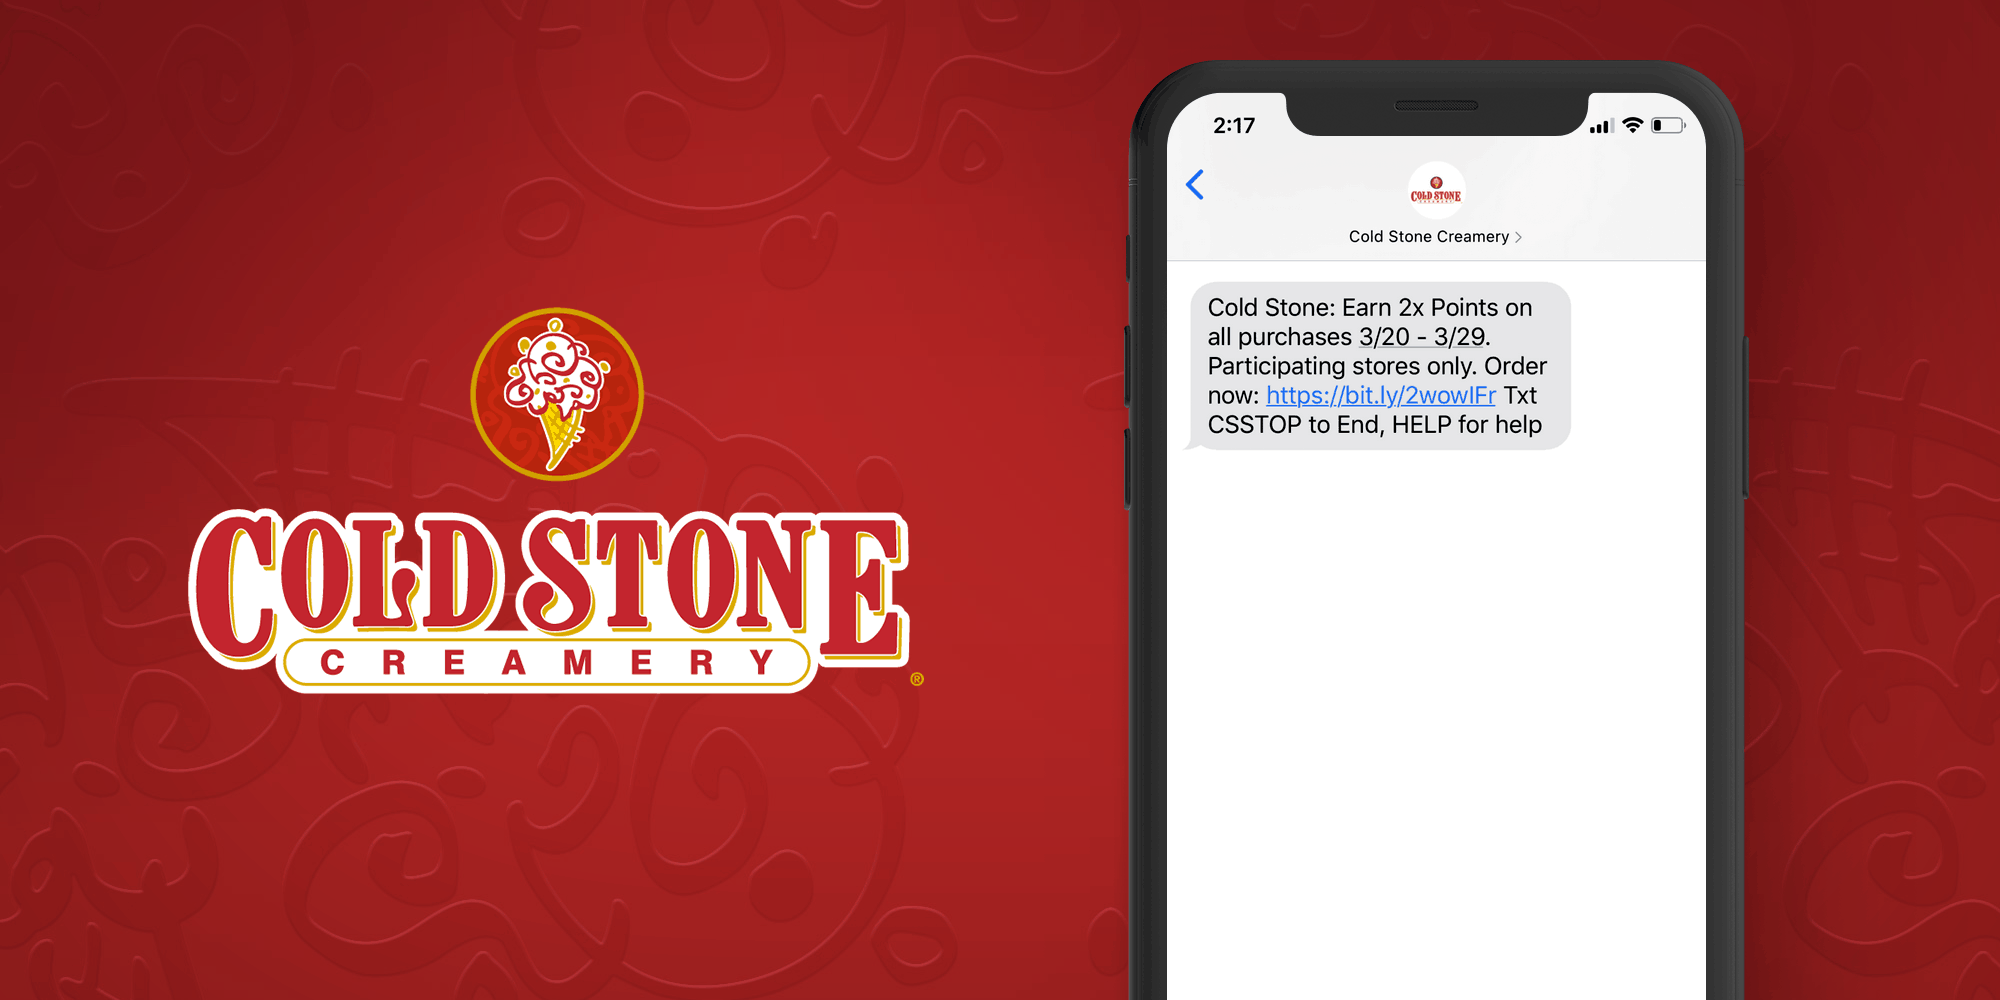 Coldstone Creamery SMS Marketing Example - 50 Examples of Brands Using SMS Marketing